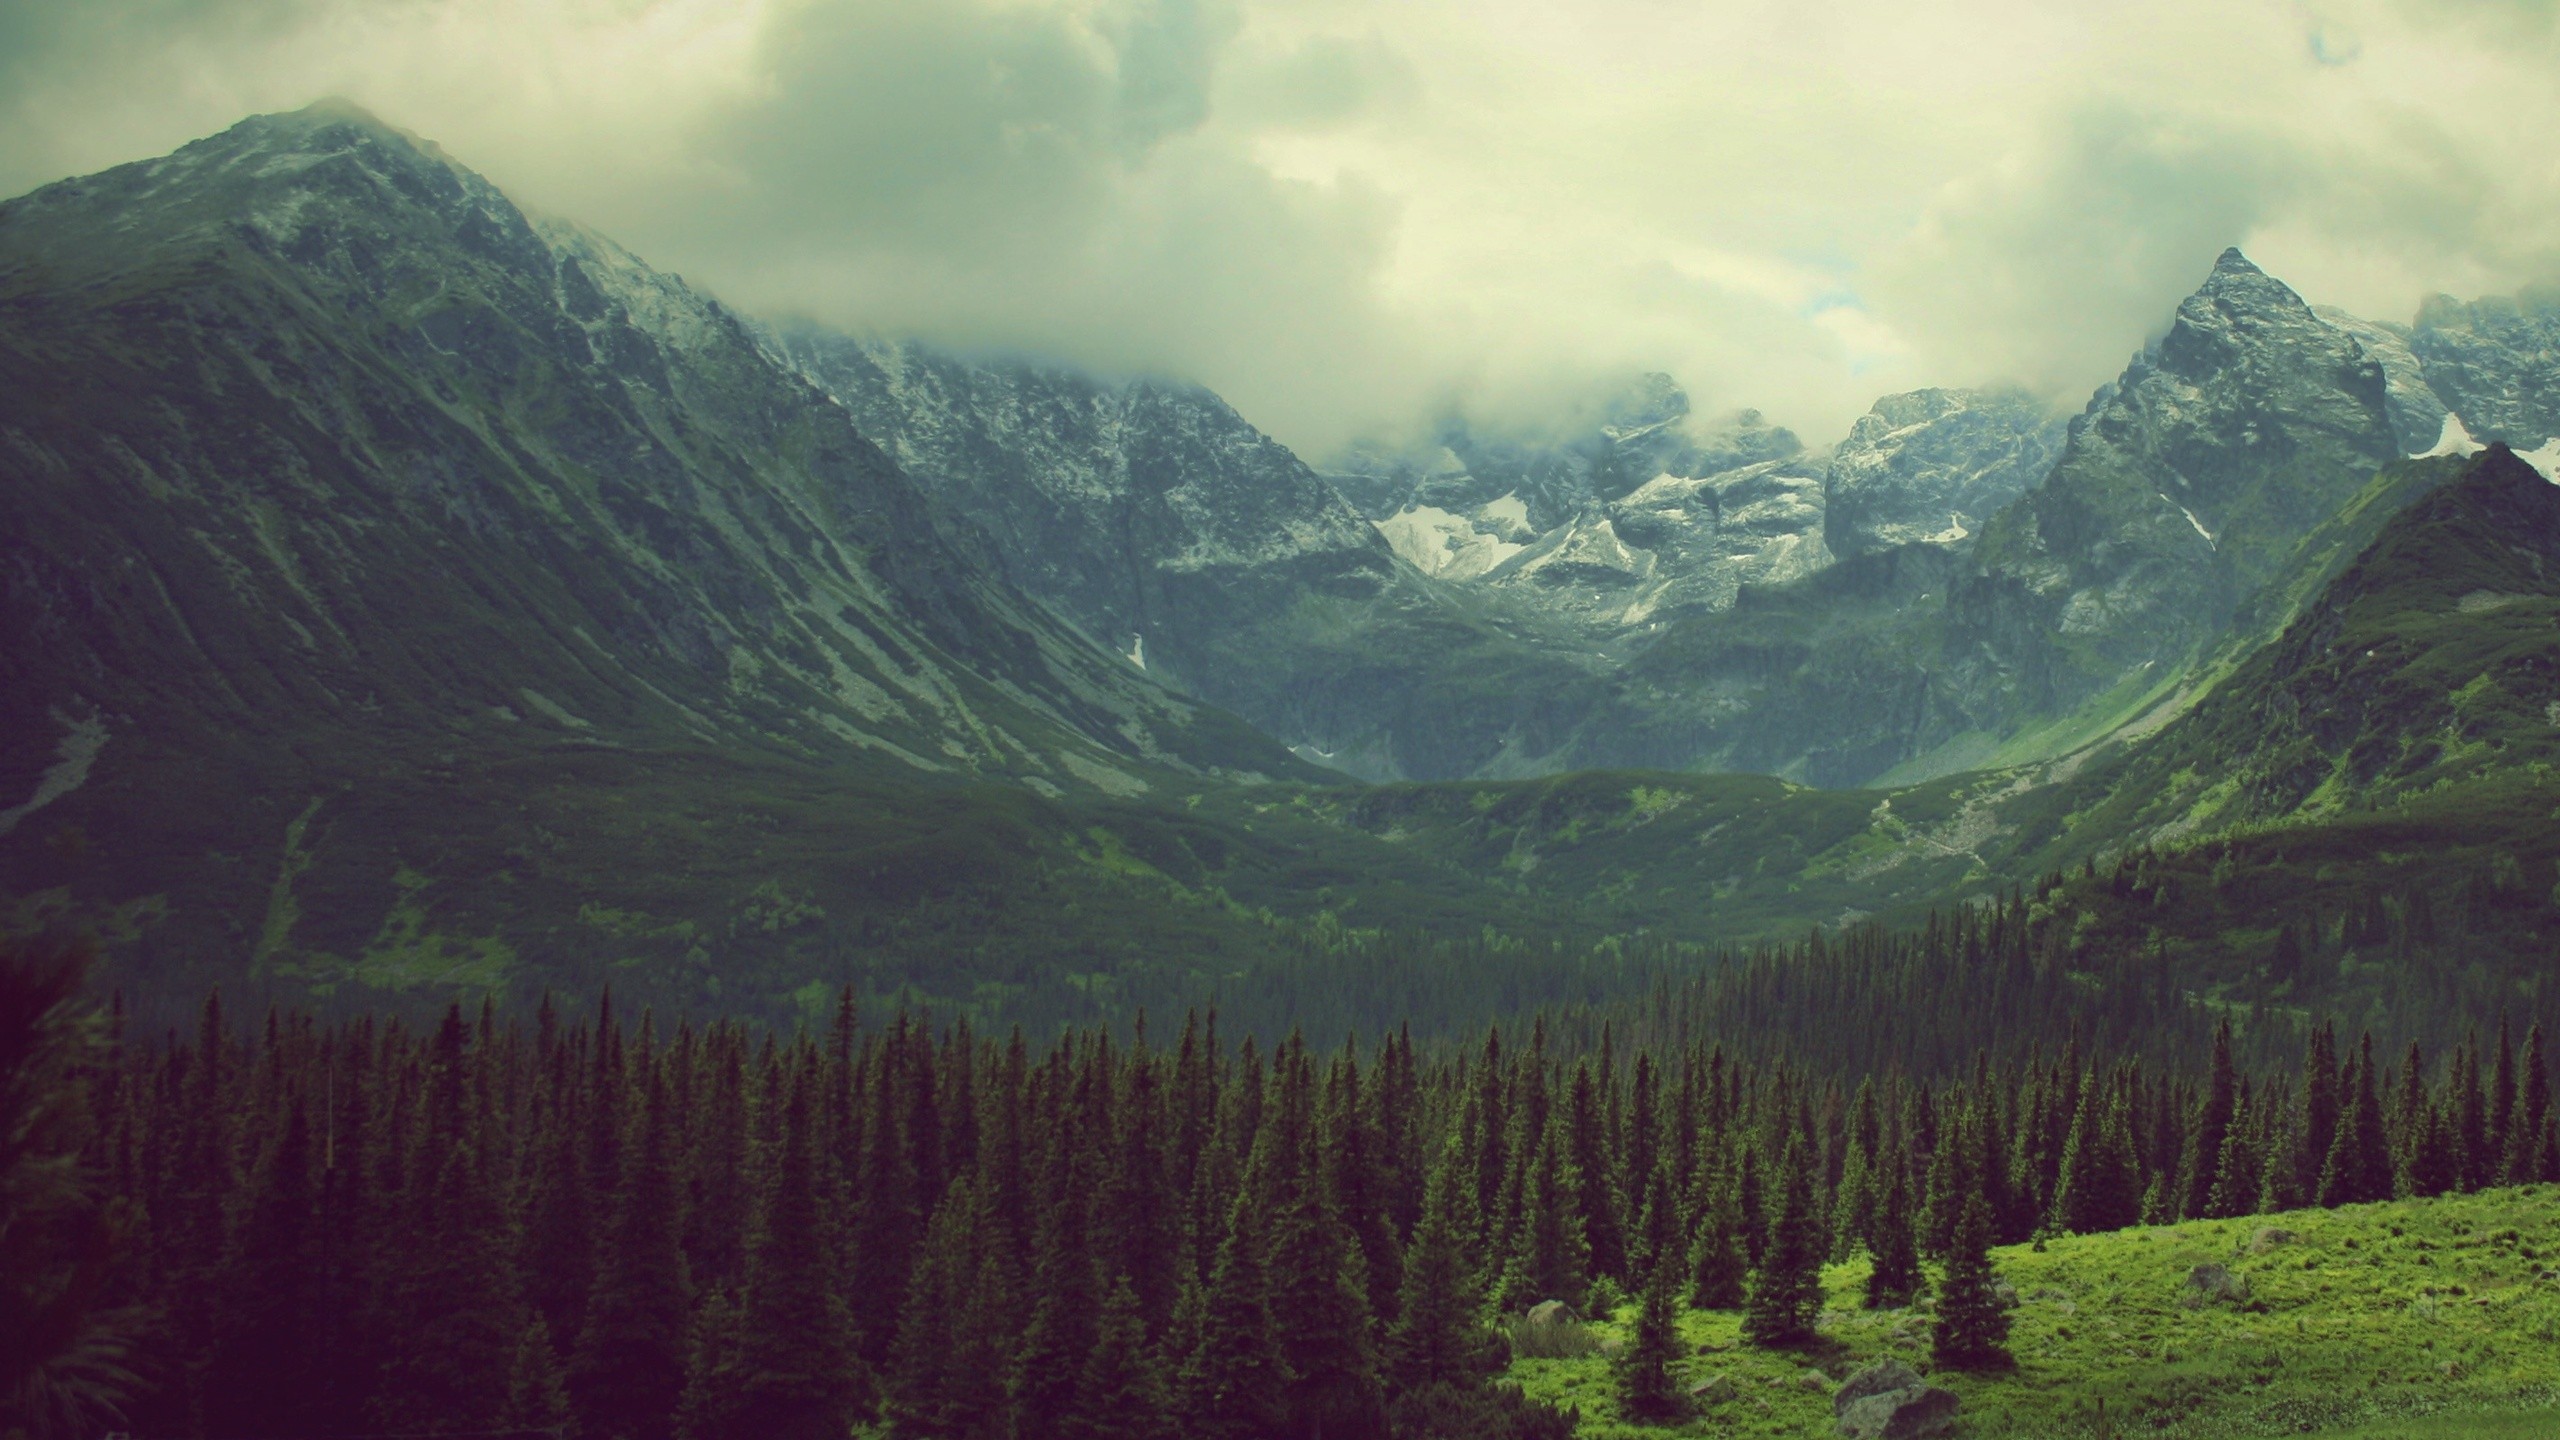 General 2560x1440 mountains valley pine trees landscape nature forest clearing Tatra Mountains